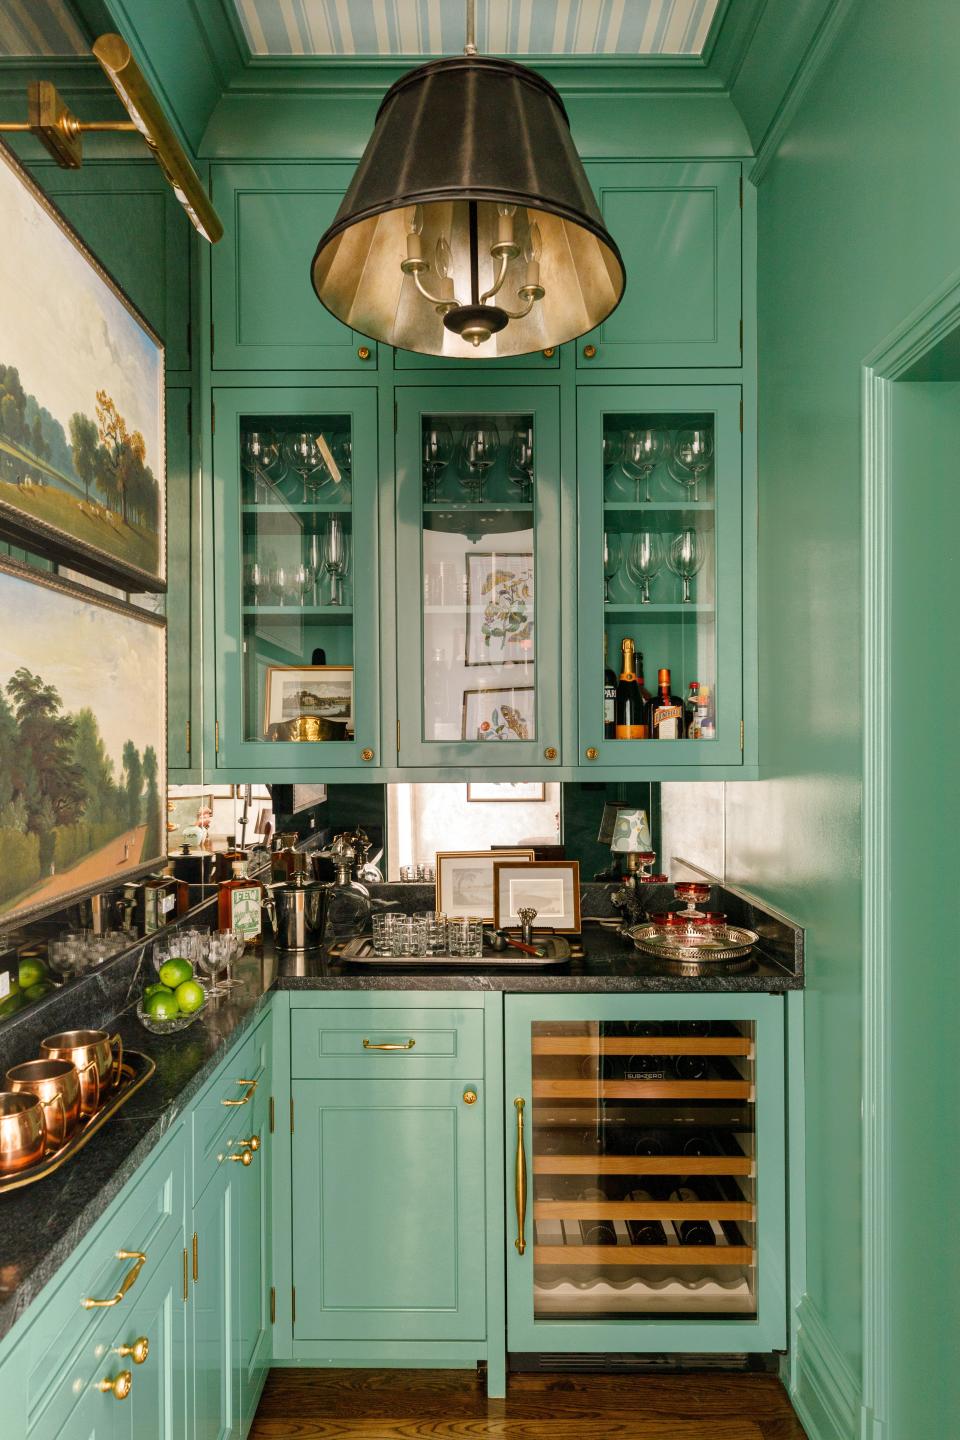 In a historic Brownstone in Chicago’s Lincoln Park, M + M Interior Design bathed the wet bar in a deep green.